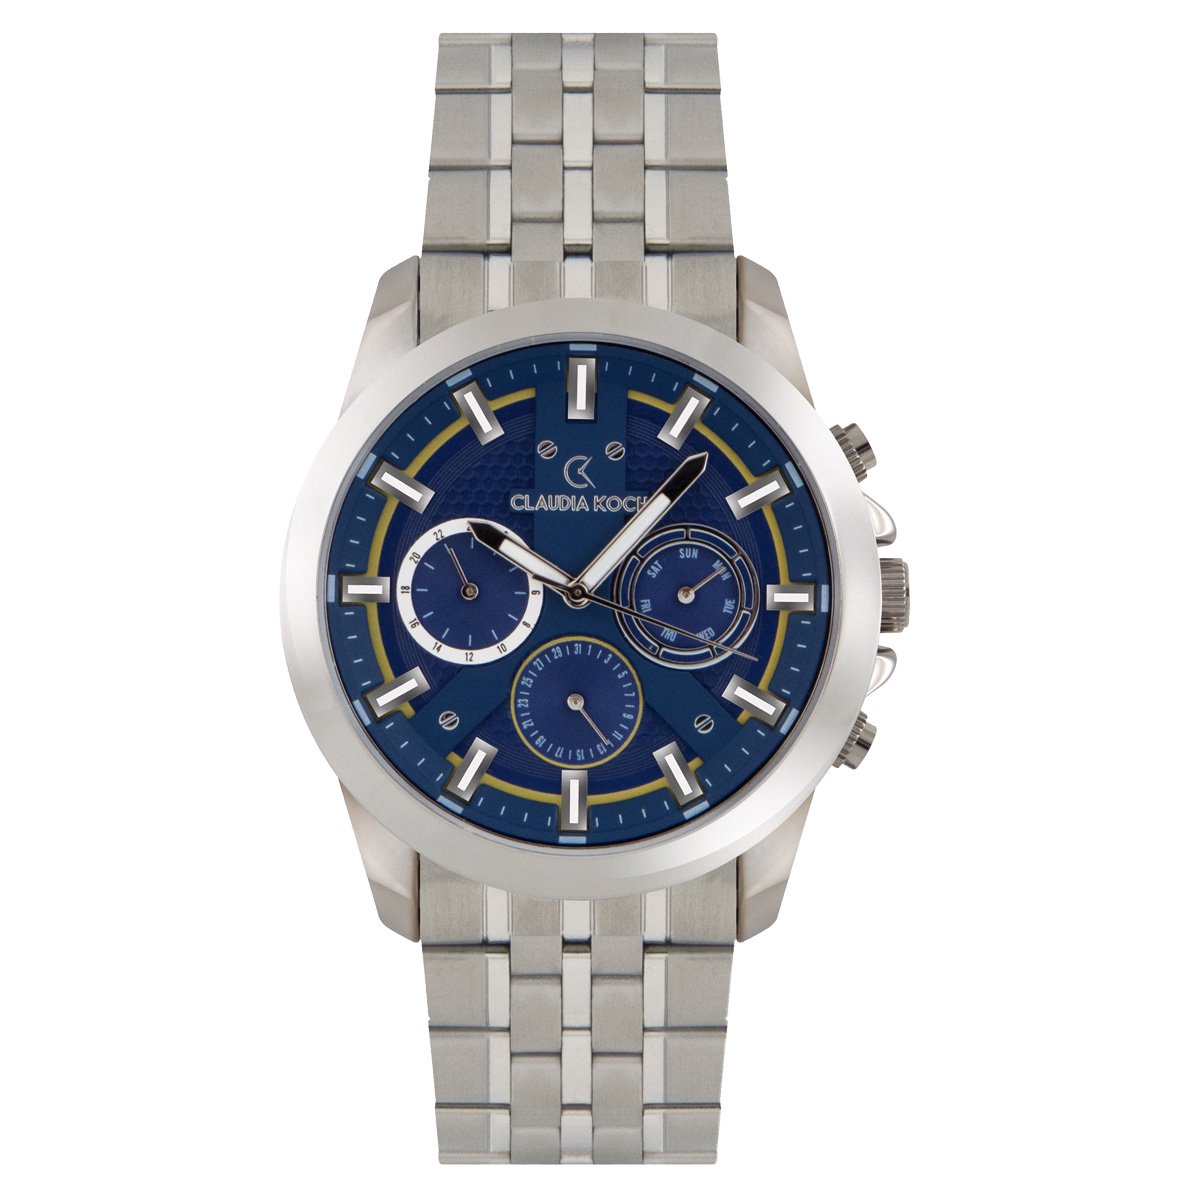 ClaudiaKoch CK 4313 Silver with Blue Analog Chrono Stainless Steel